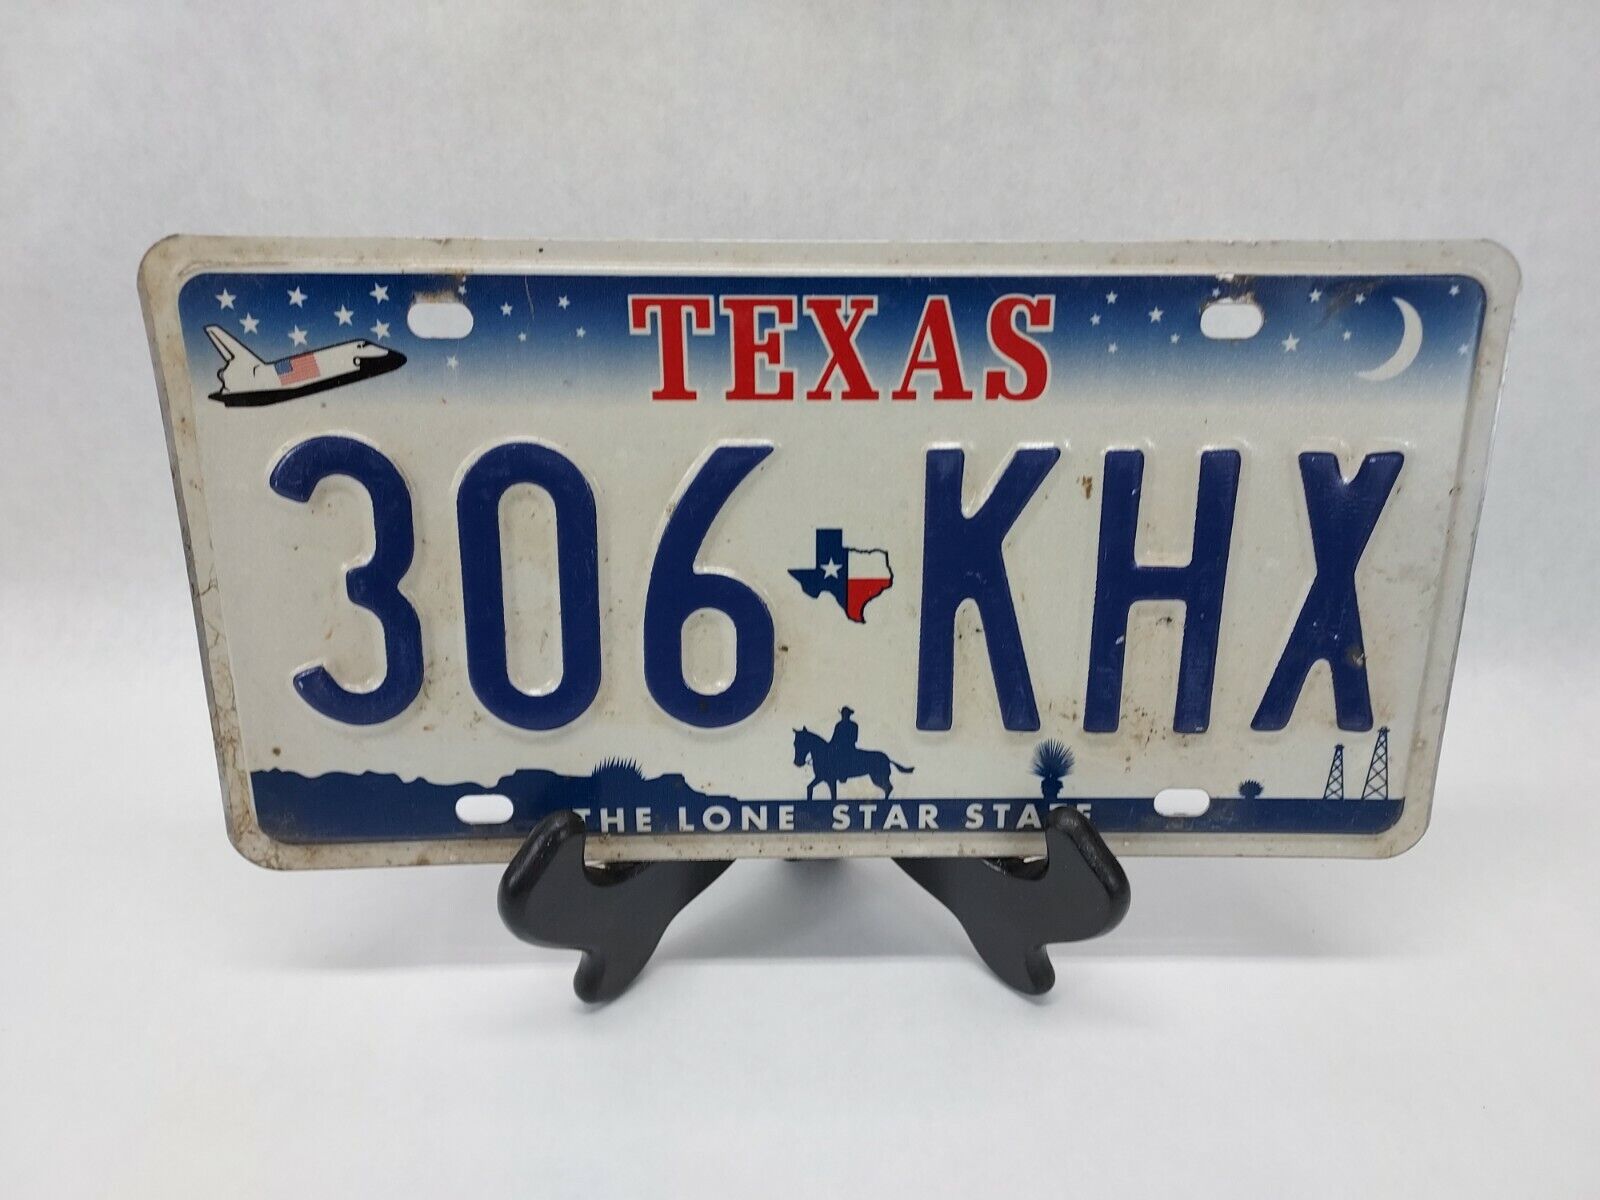 Vintage Texas License Plate With Space Shuttle ~ Garage Wall Art Barn Patina